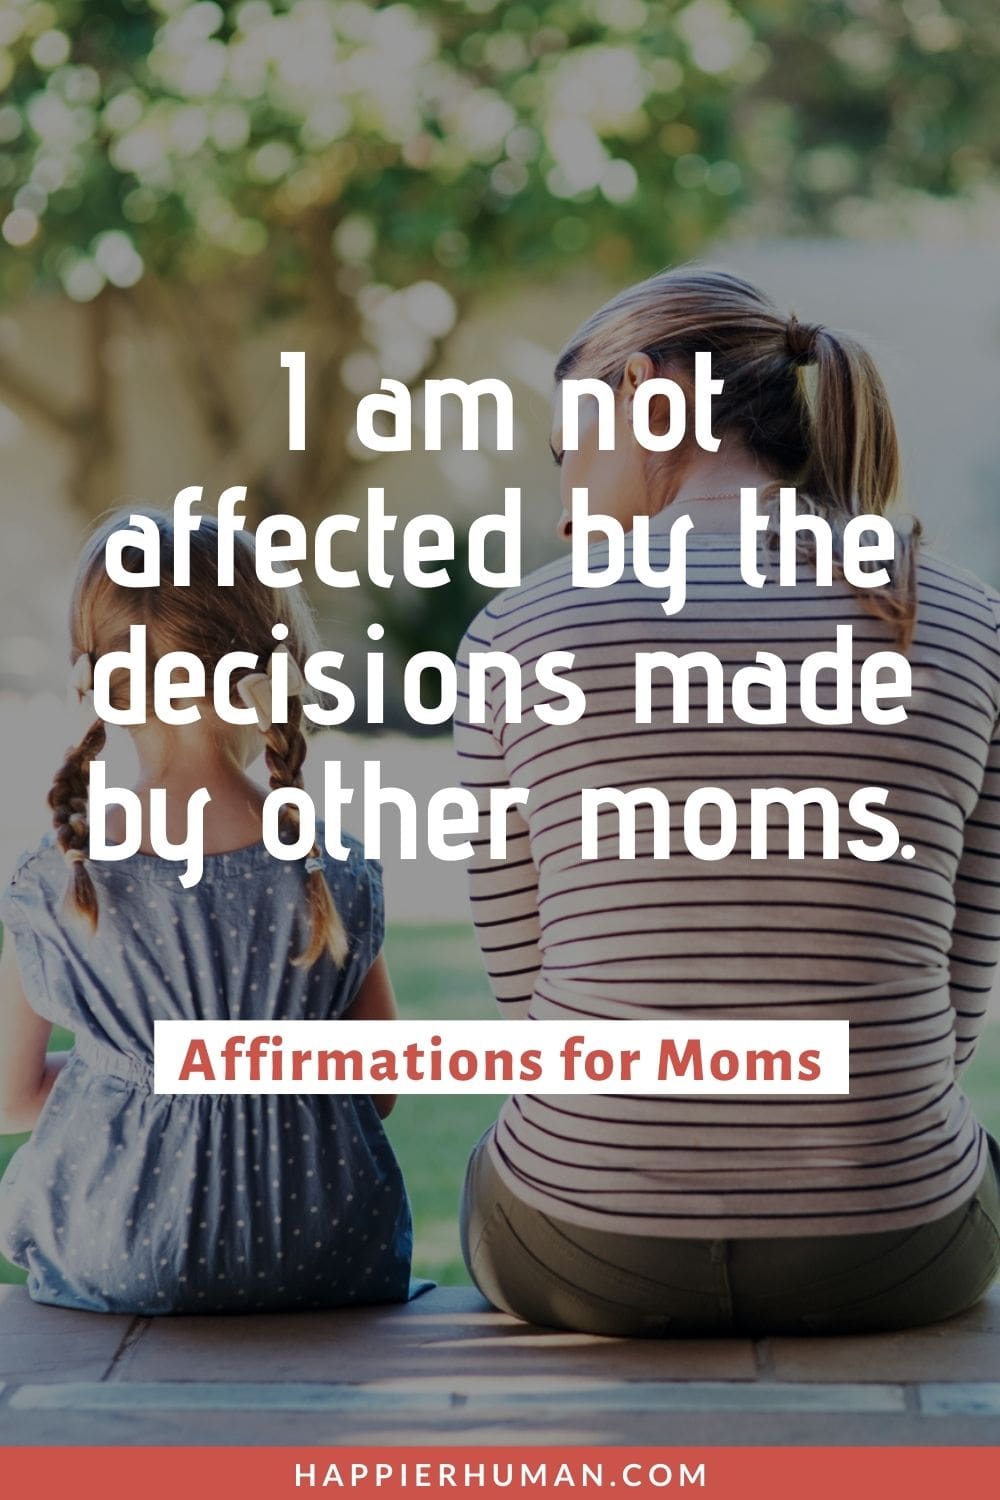 Affirmations for Moms - I am not affected by the decisions made by other moms. | affirmations for new moms | affirmations for overwhelmed moms | positive affirmations for parents health